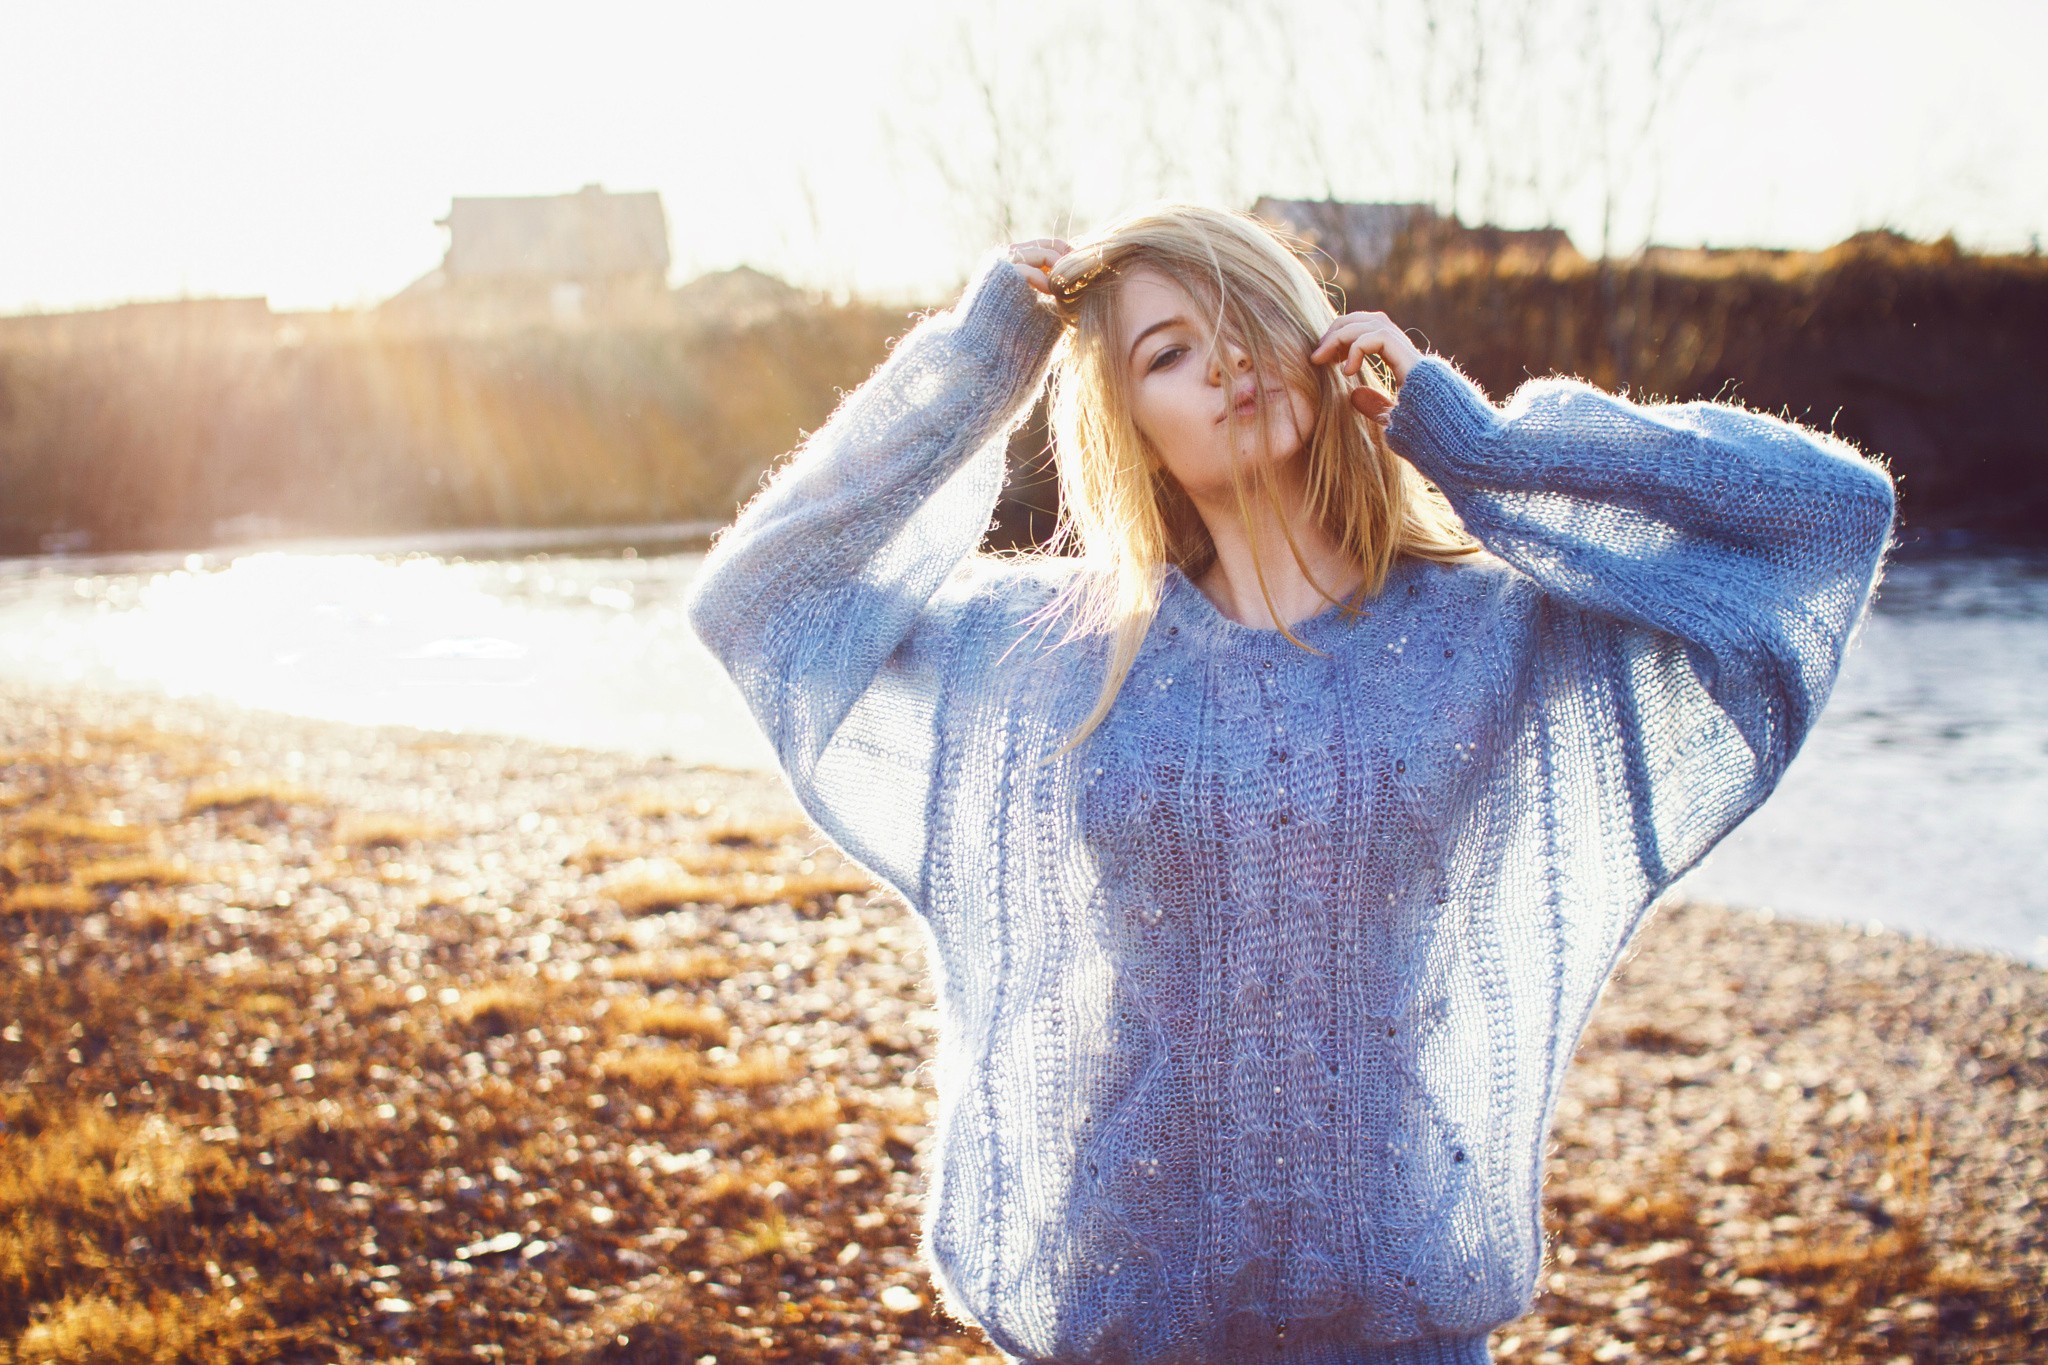 People 2048x1365 women blonde model women outdoors sunlight looking at viewer outdoors blue clothing standing village sweater